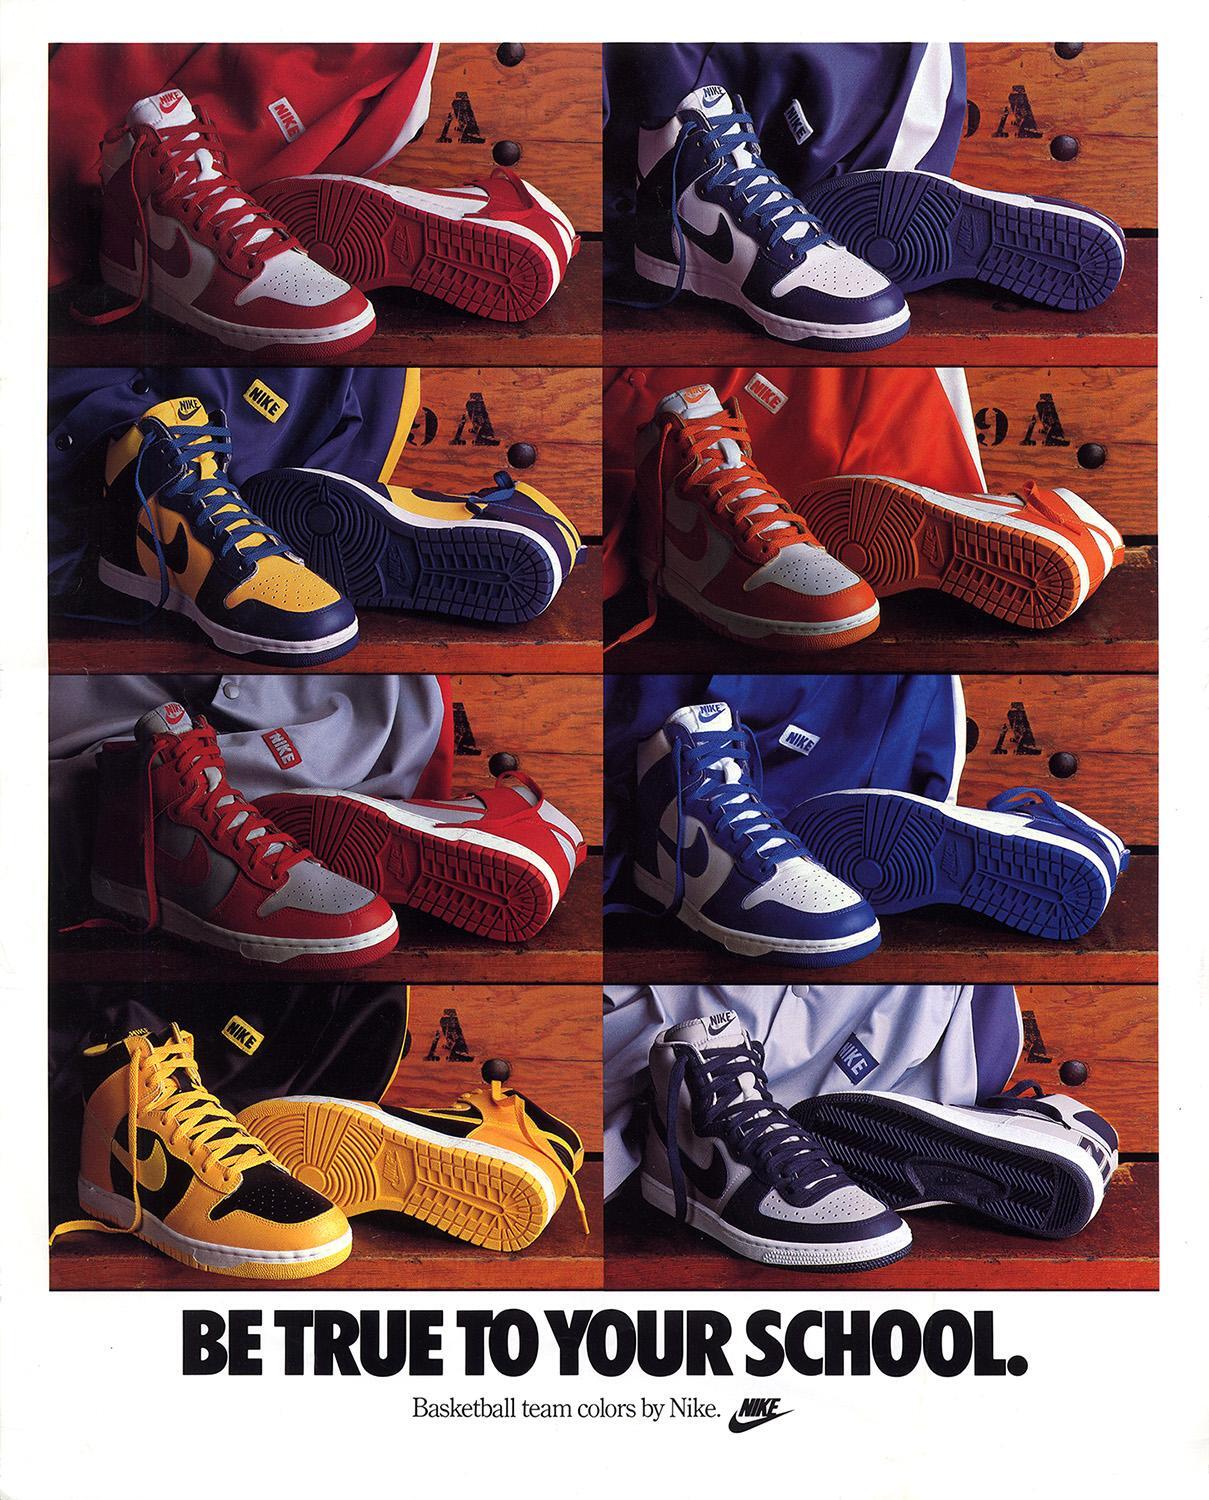 Hacer Reclamación Variedad Nike Basketball on Twitter: "How do you stay true to your school? Share  your images with us on Instagram using #NikeRoar. http://t.co/yIRKlUbDMQ" /  Twitter